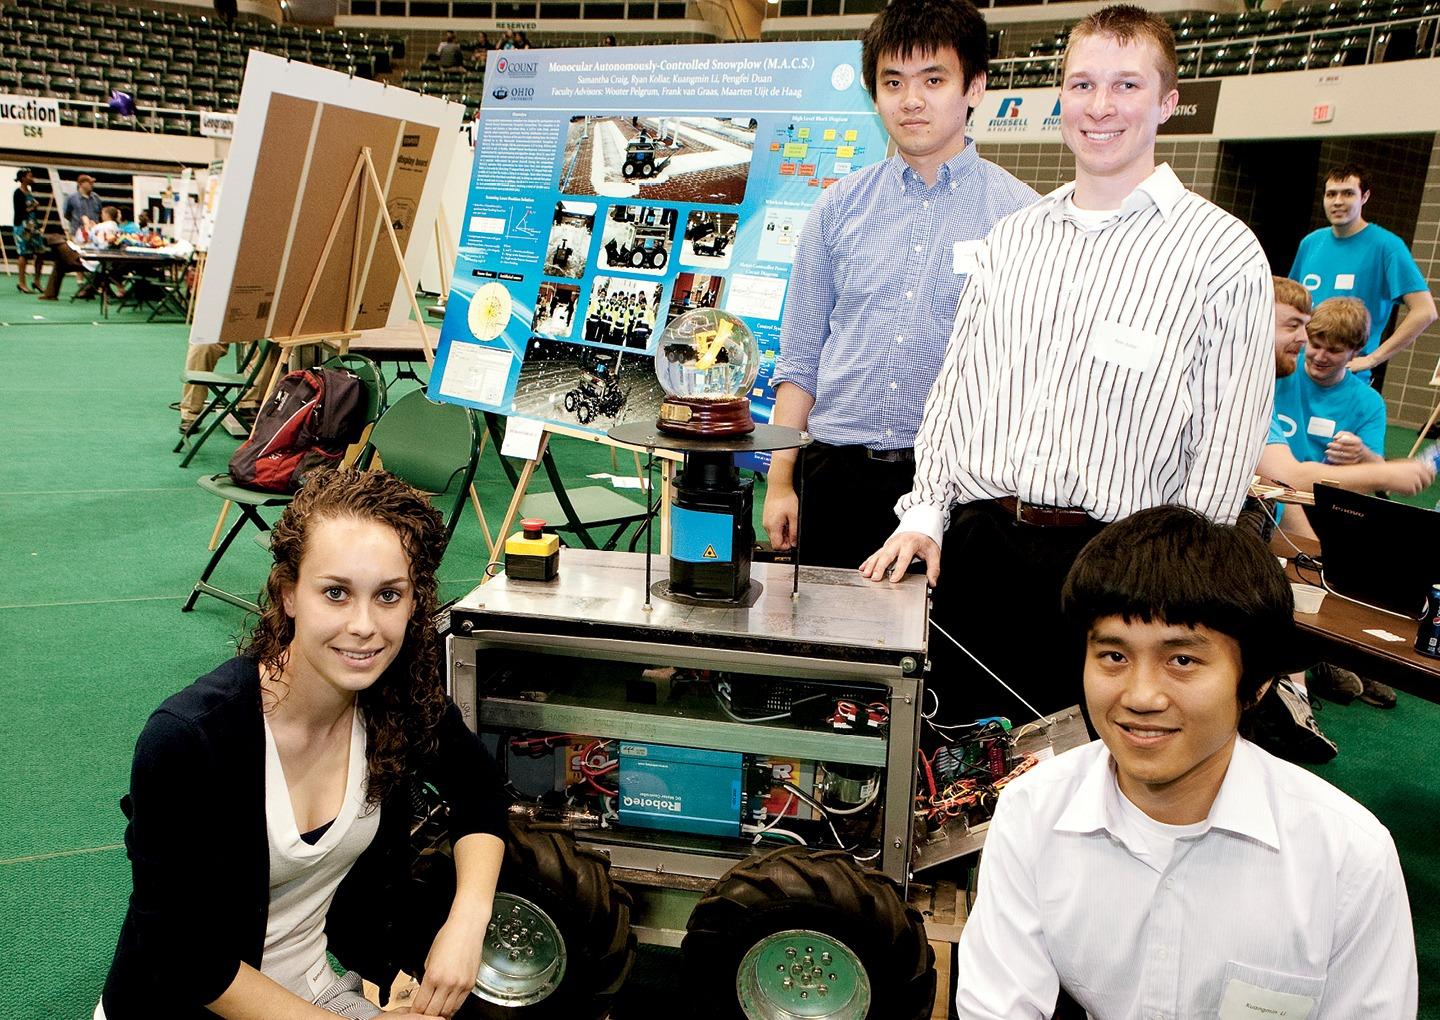 Pengfei “Phil” Duan, MS ’11, PHD ’18, [SECOND FROM LEFT] and a team of fellow engineering students show off their robotic snowplow at the 2012 Student Expo. Photo by Wayne Thomas, MA ’12